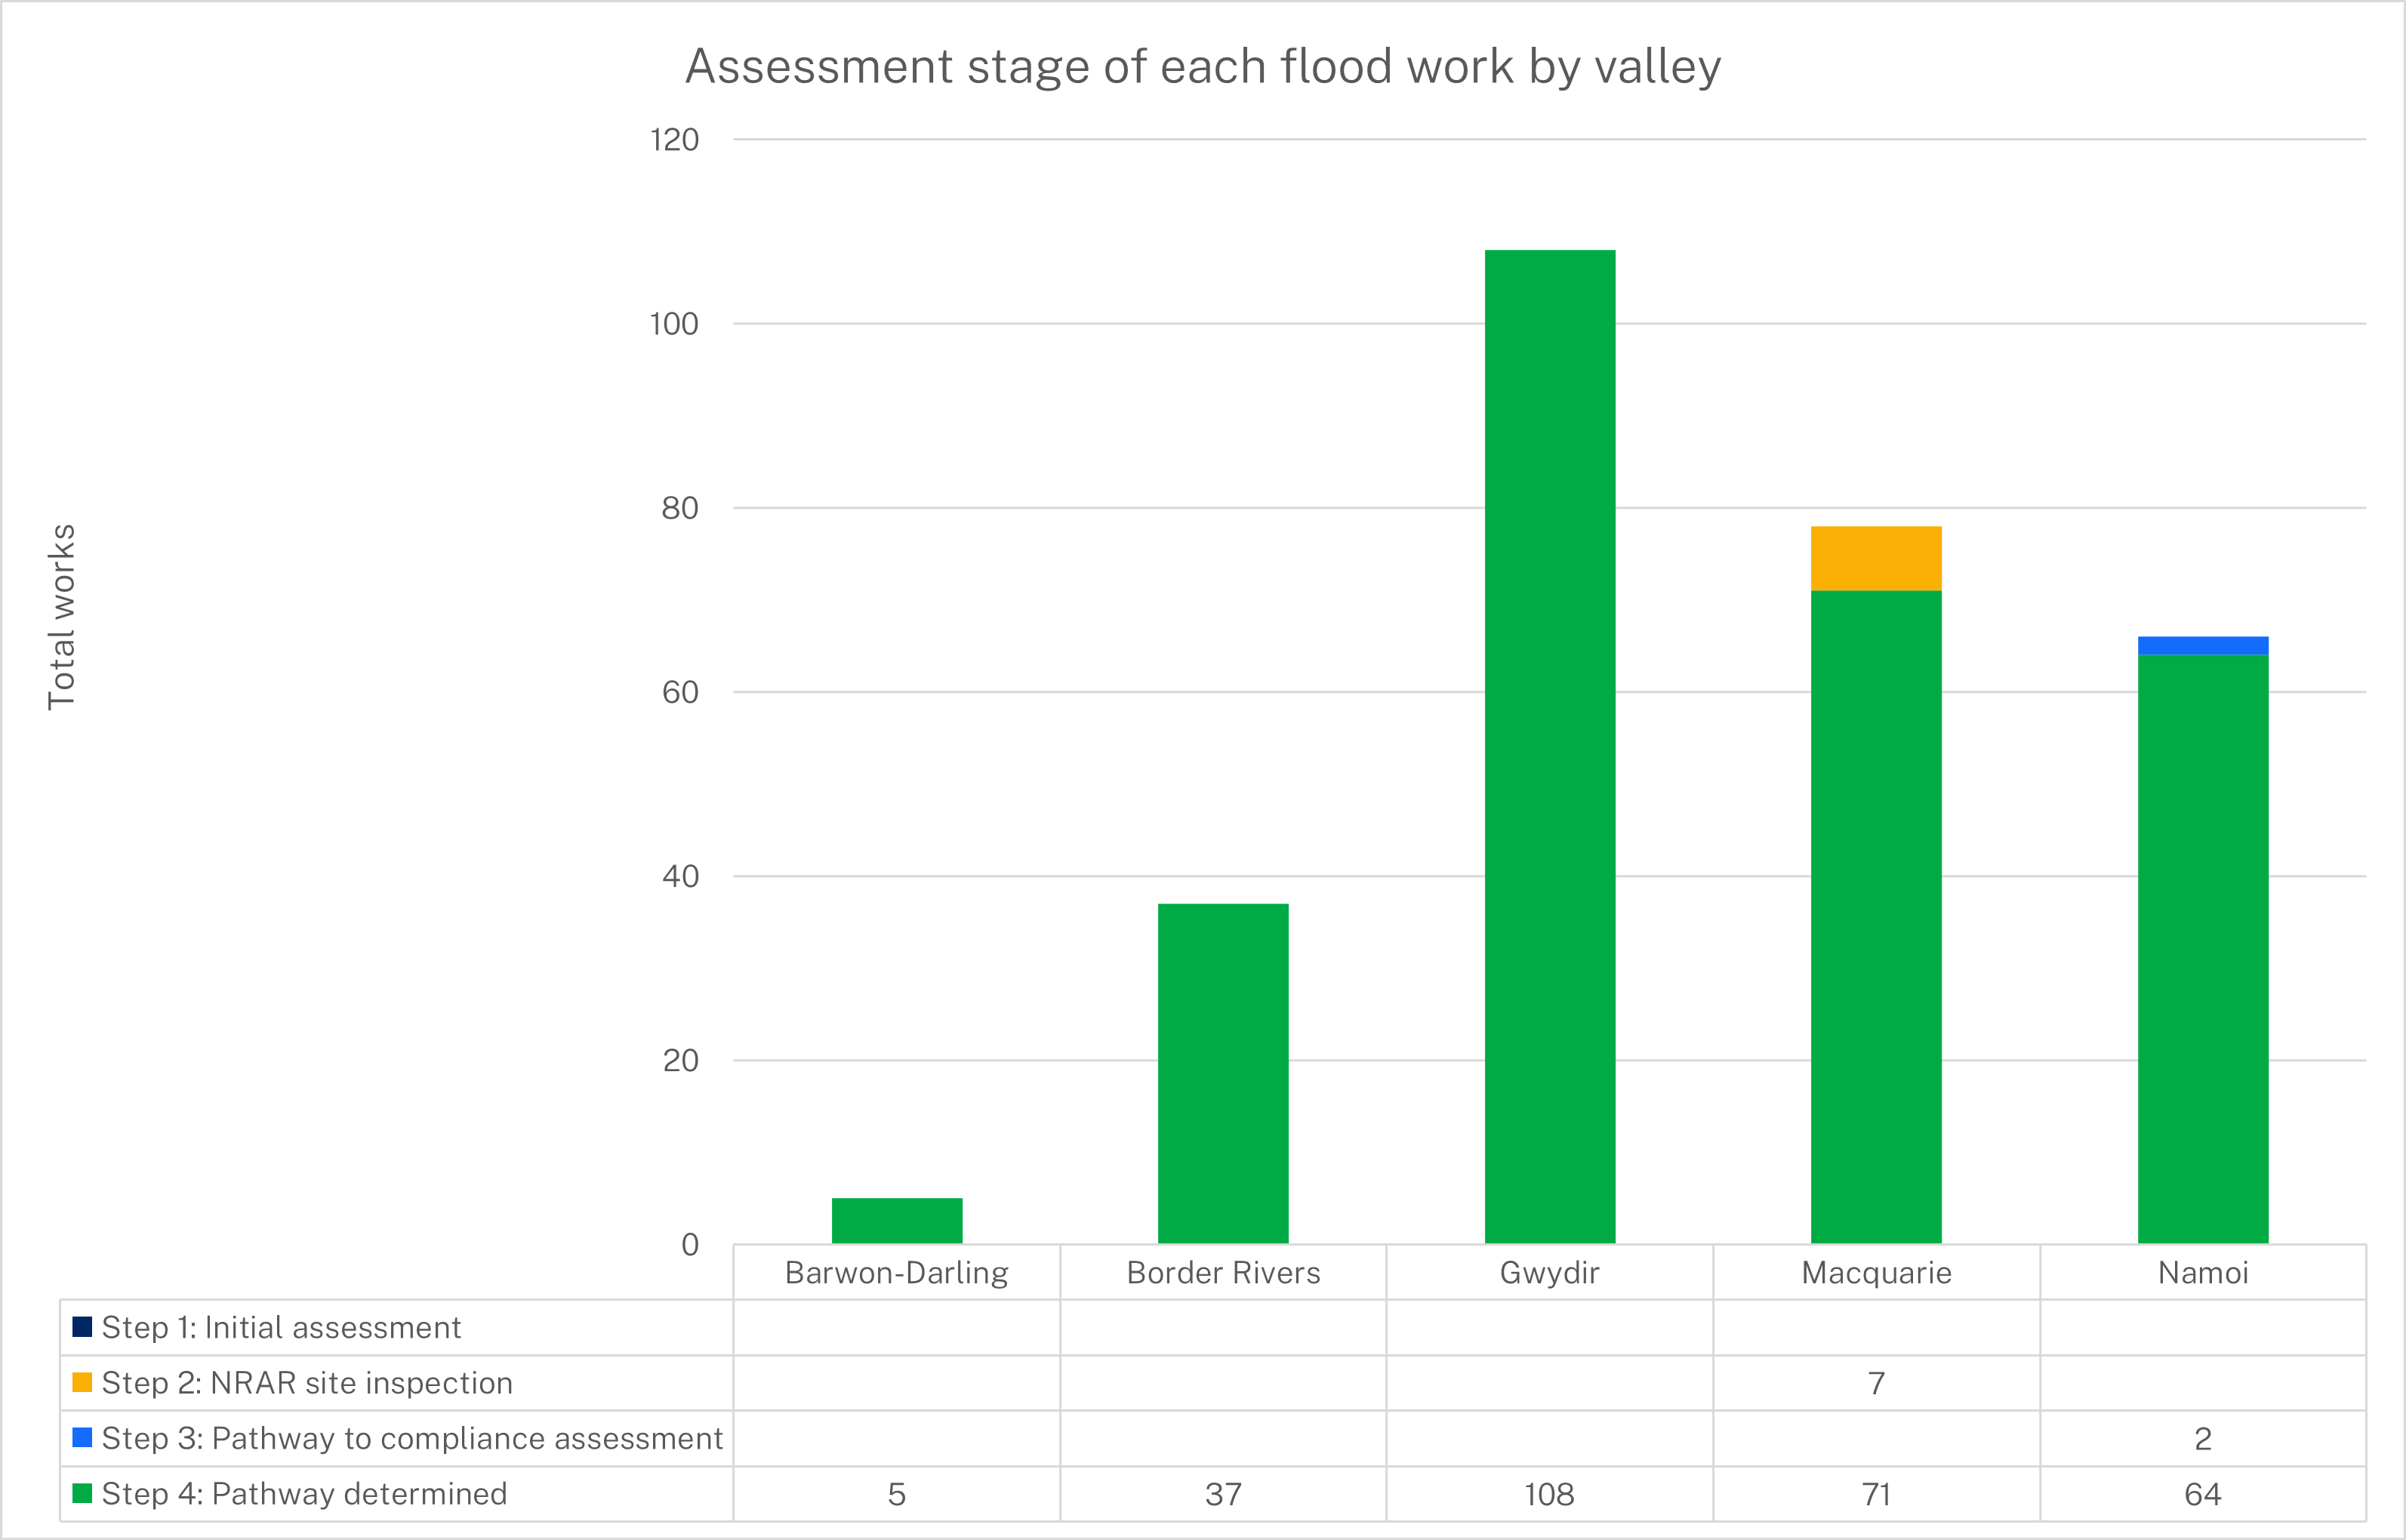 A table outlines the assessment stage for all flood works by valley.